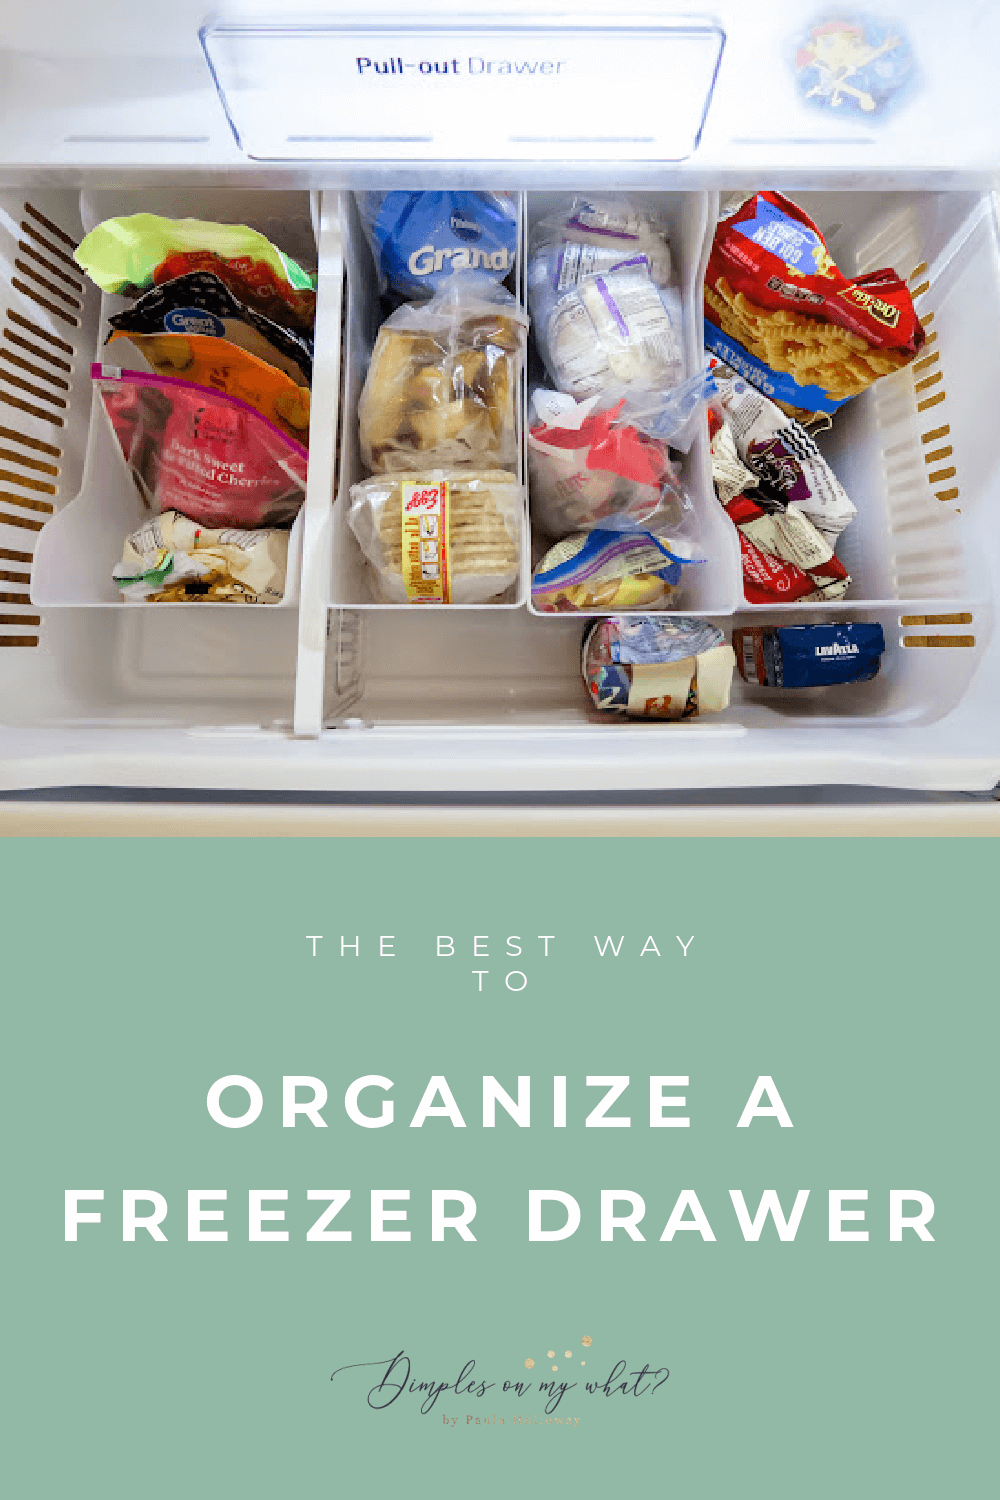 HOW TO ORGANIZE FREEZER DRAWERS - dimplesonmywhat